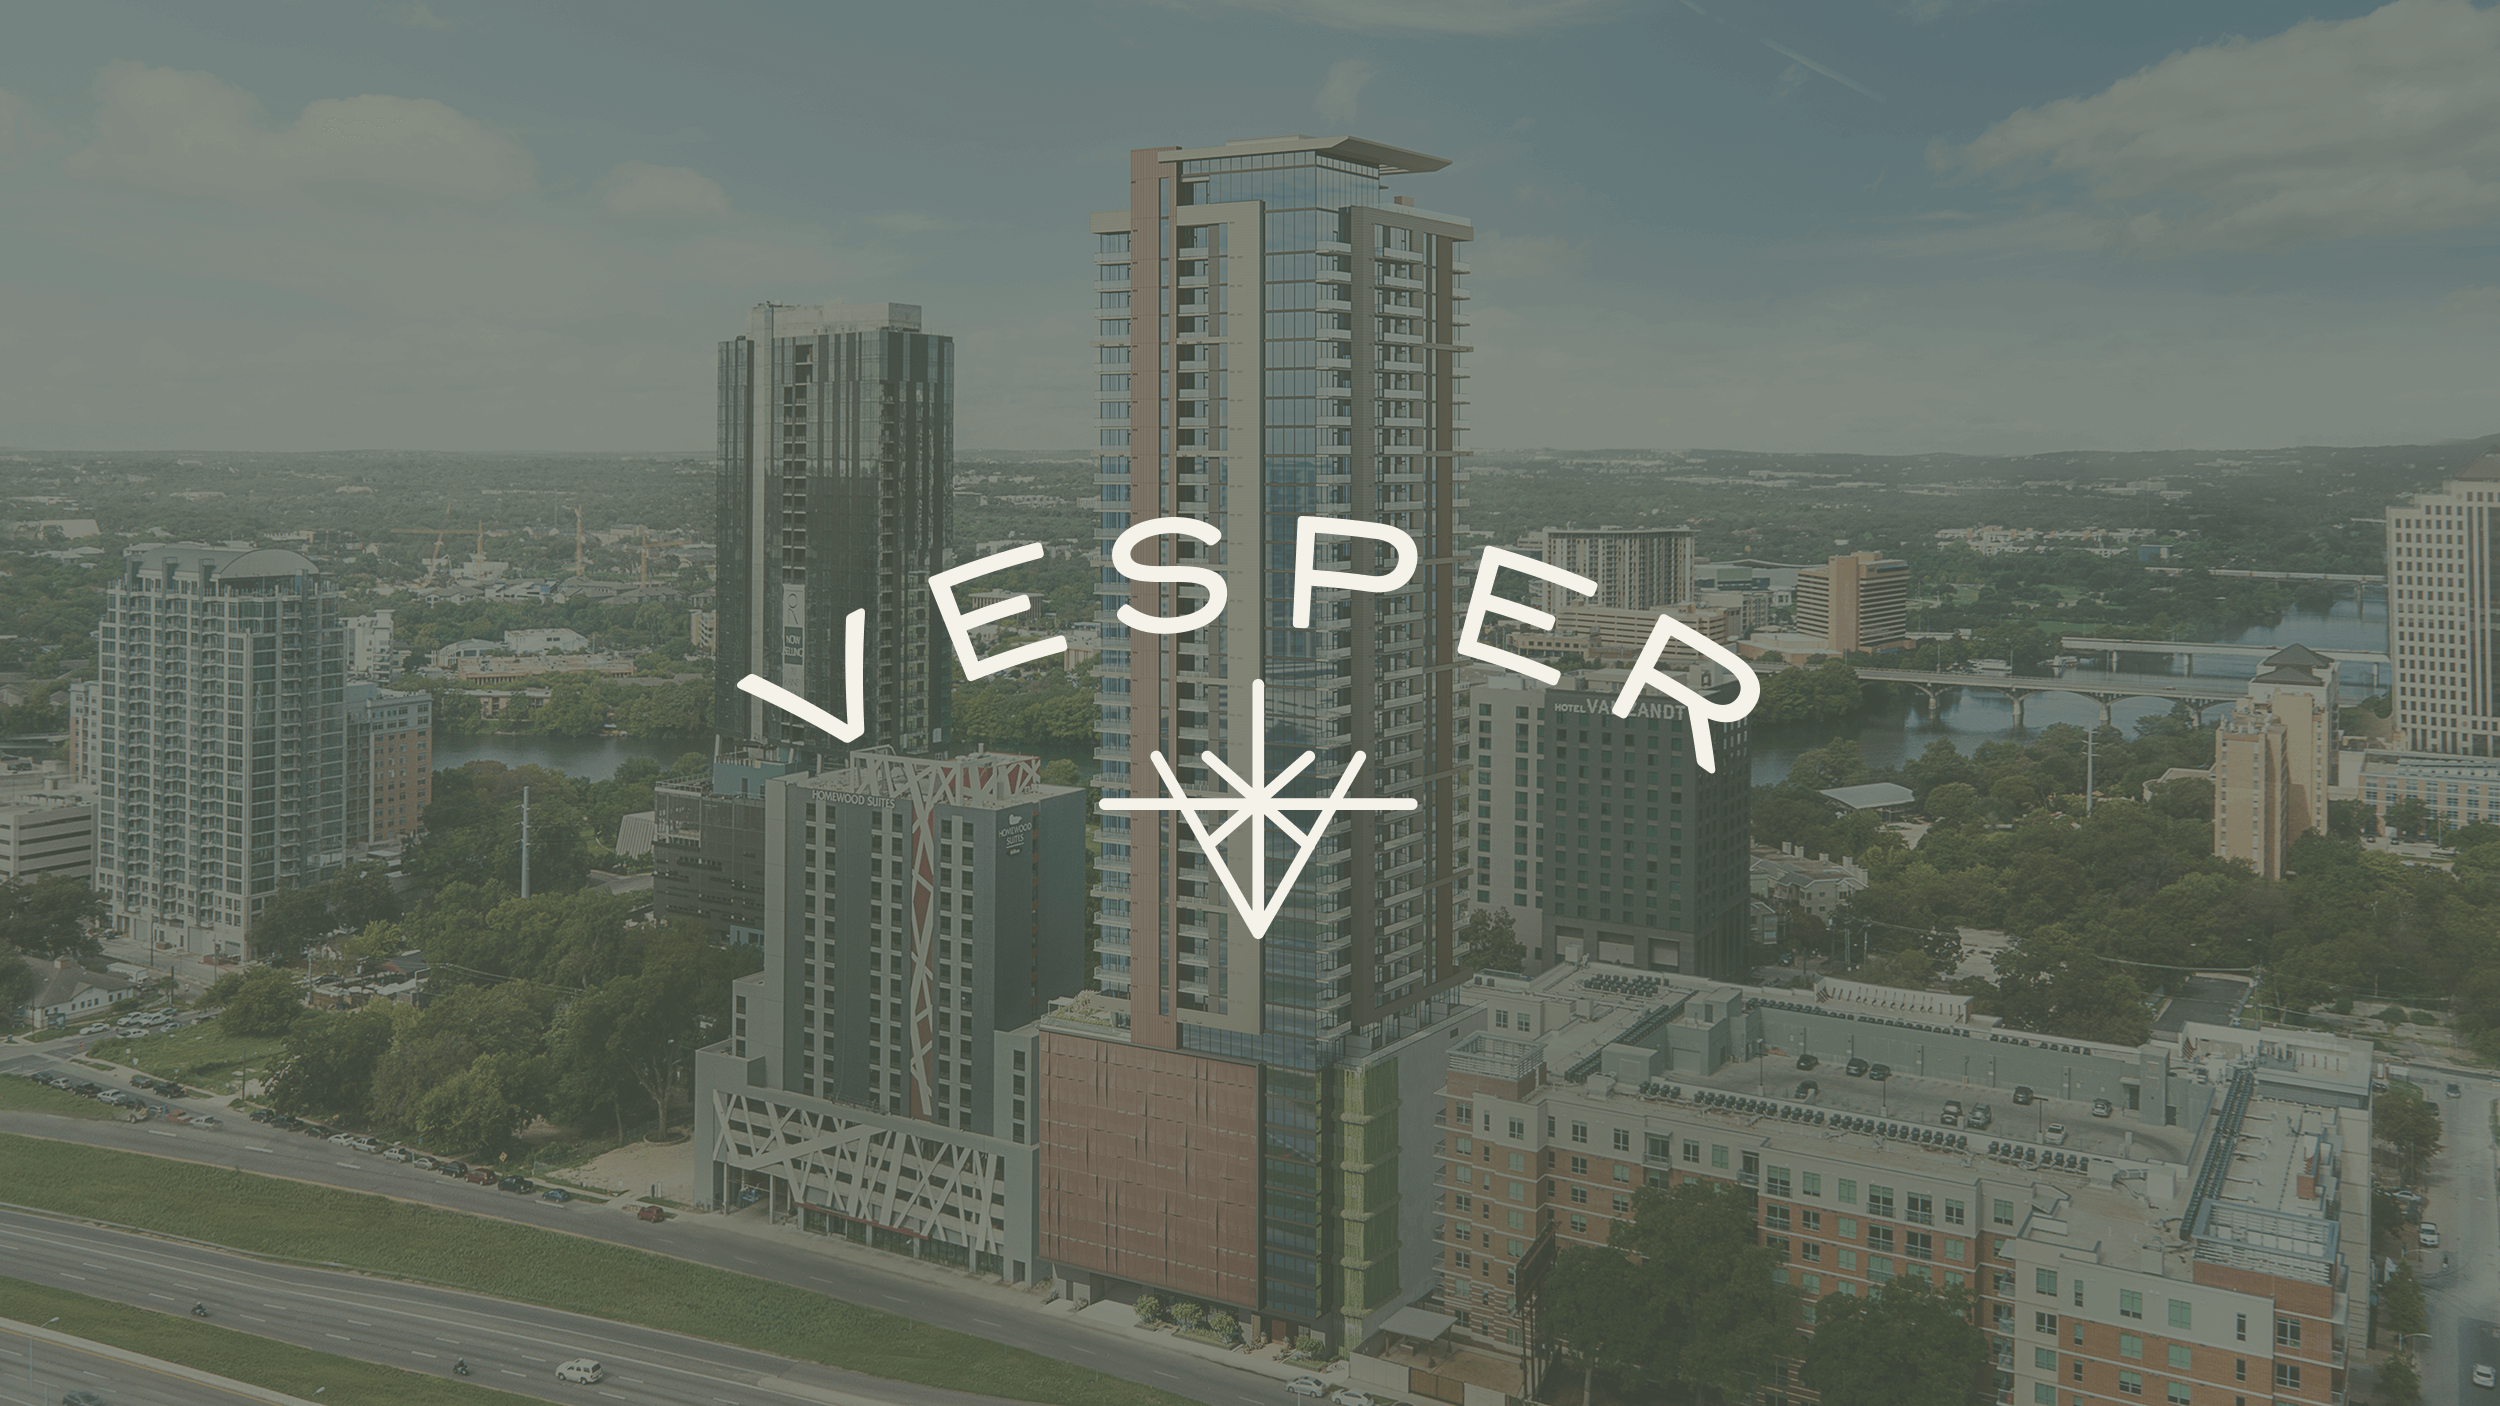 Vesper logo on green background with render of the building